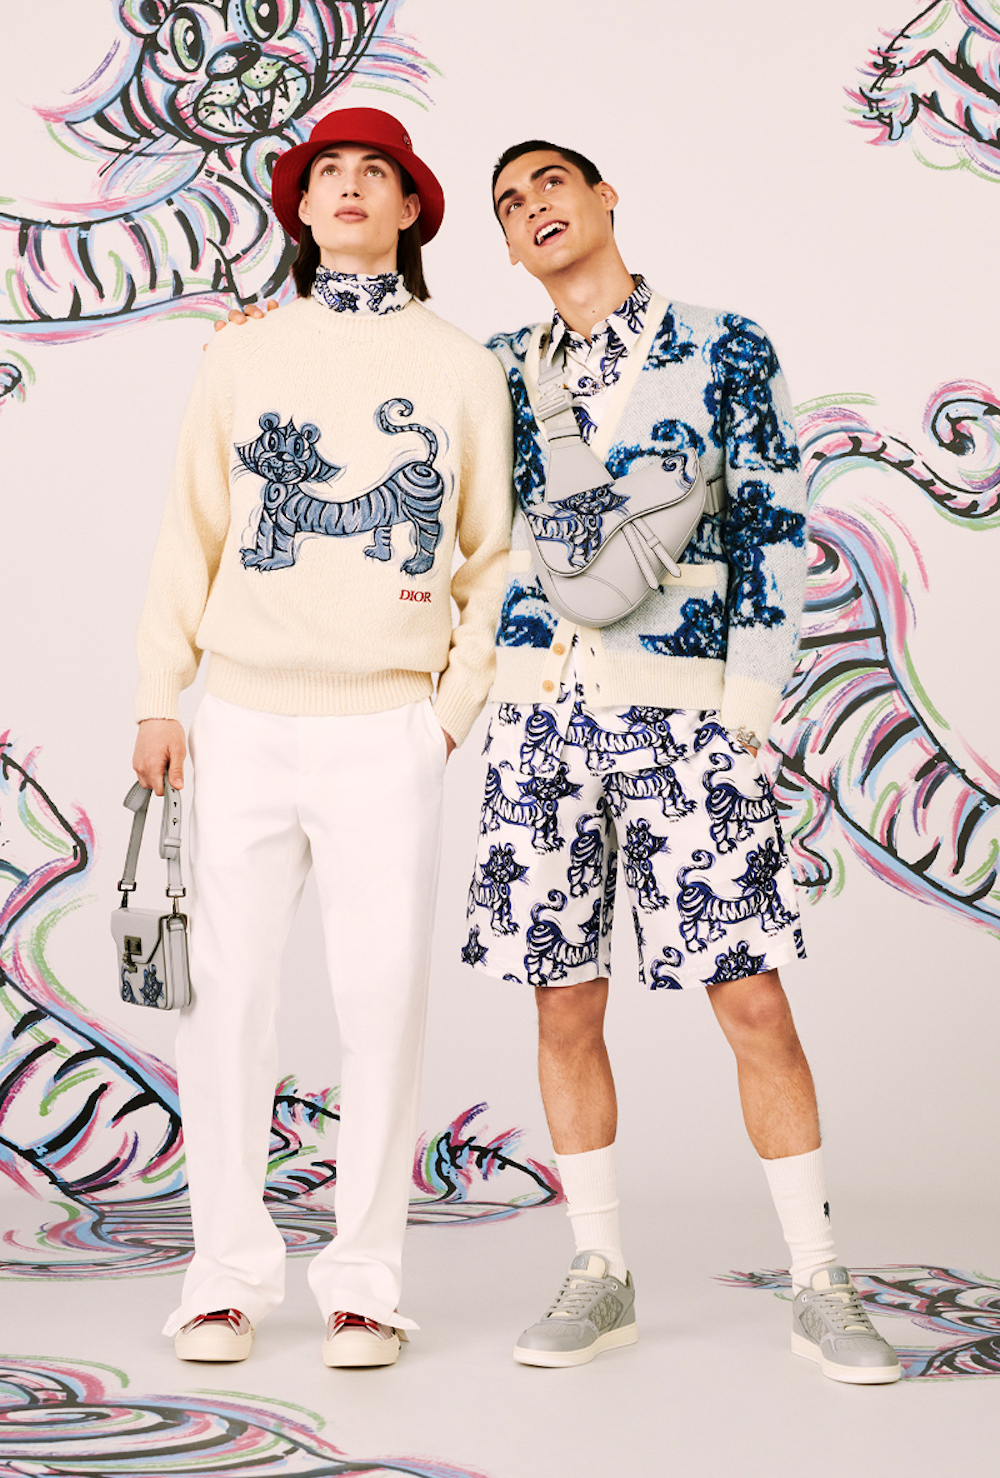 Dior Men & Kenny Scarf Debut Chinese New Year Capsule – PAUSE Online